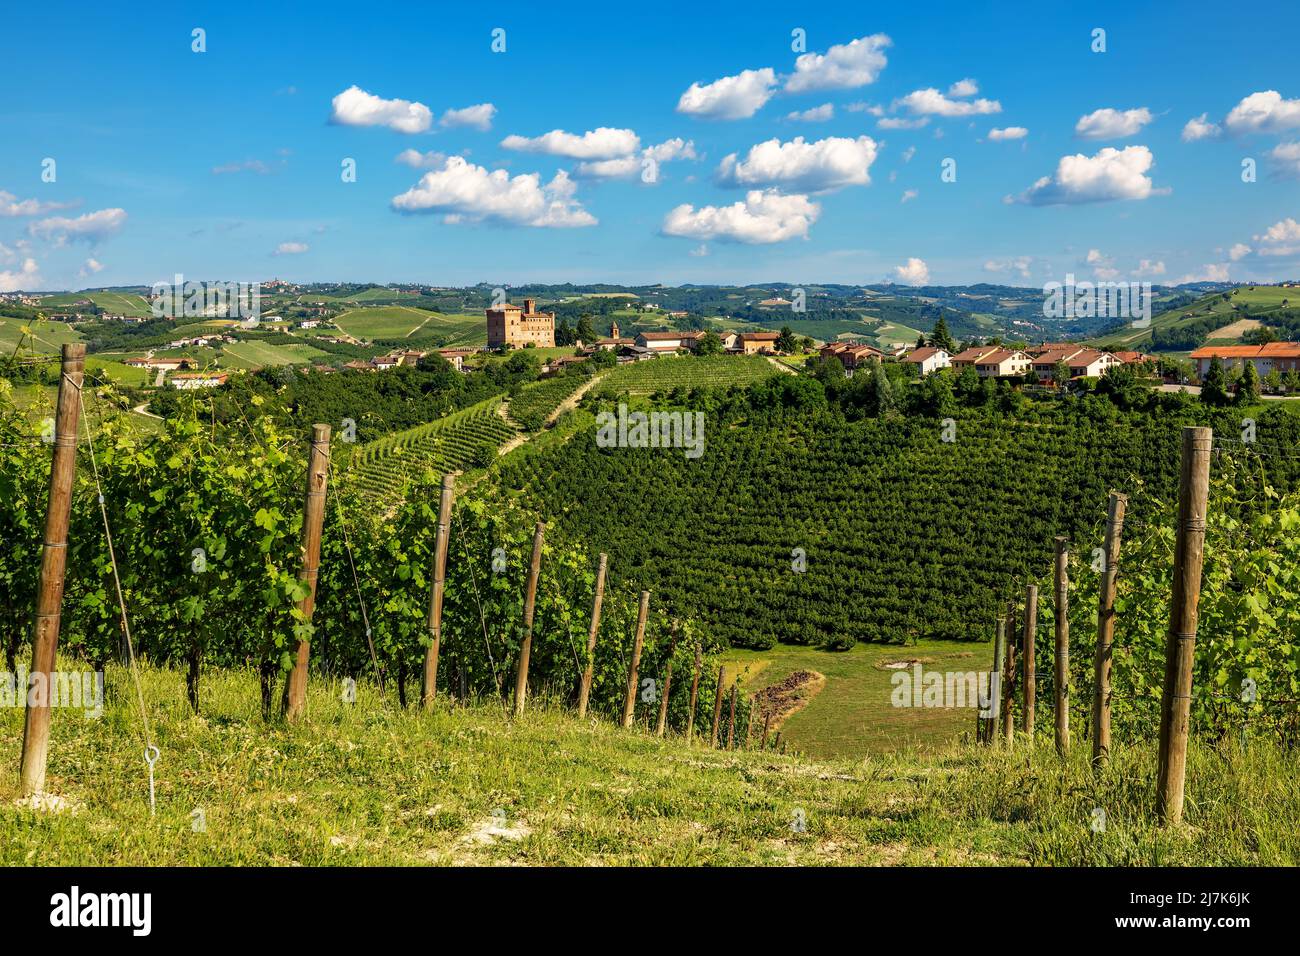 Green vineyards on the hills as small town under blue sky on background in Piedmont, Northern Italy. Stock Photo